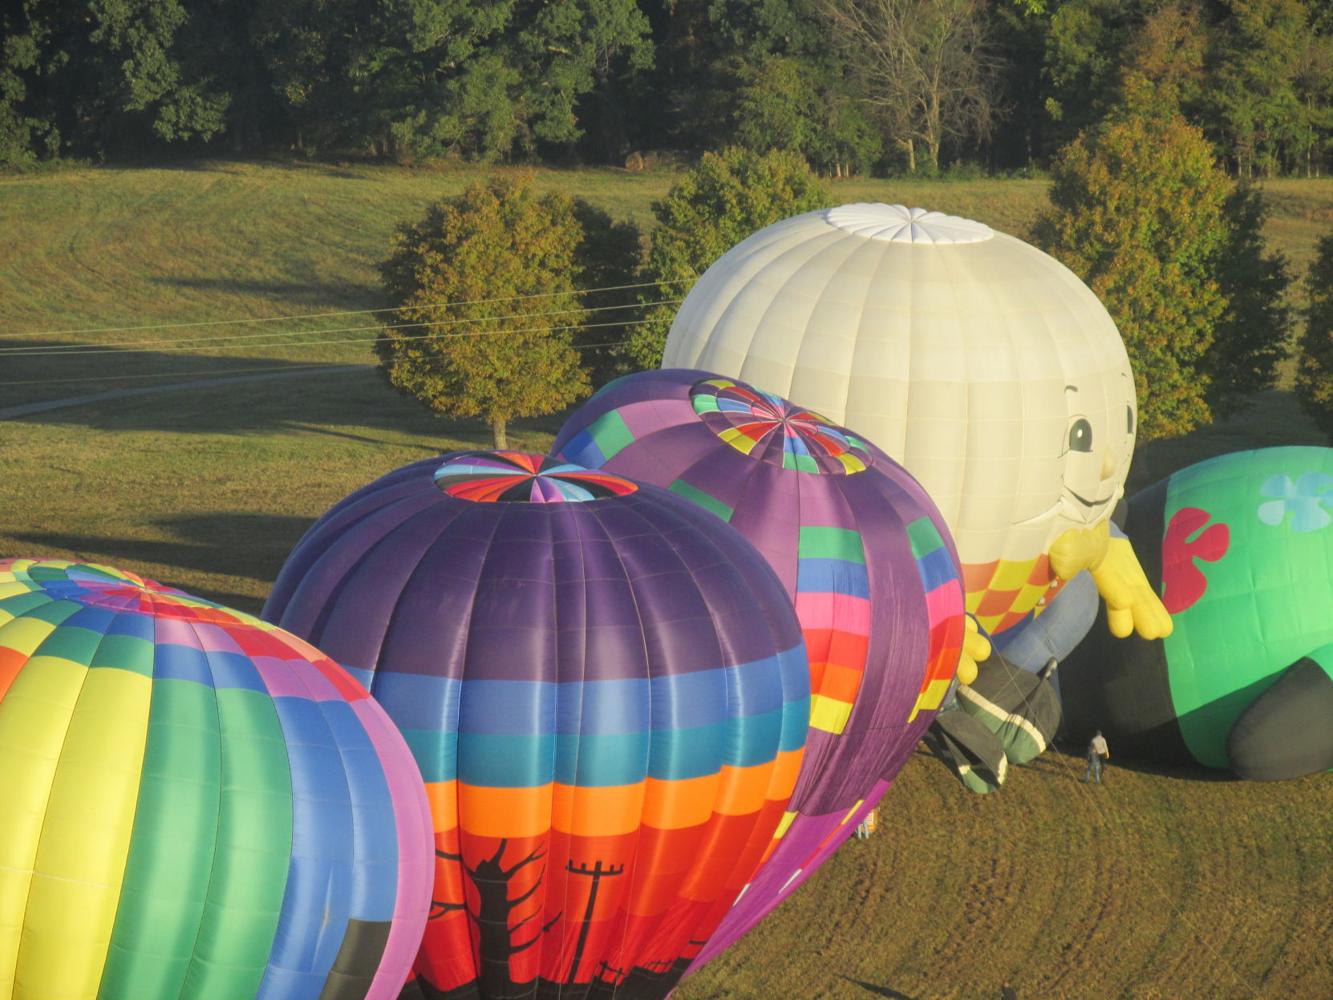 A hot air balloon ride brings excitement, thrills and a sense of